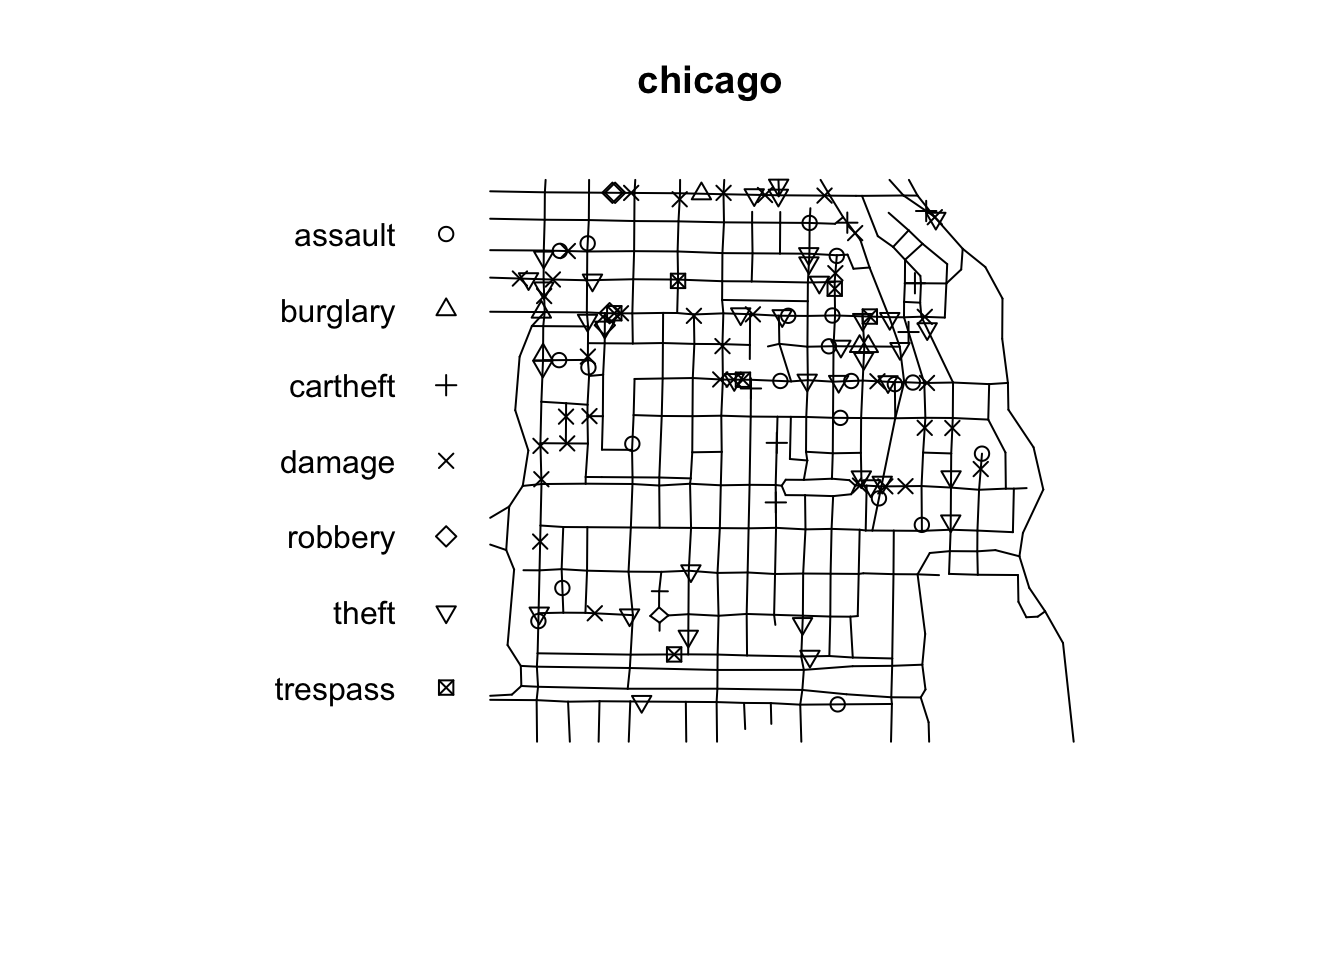 A simplified street map titled 'chicago', thin black lines trace the road network in a small section of a city. To the left, a legend matches various shapes, such as circles and diamonds to types of crime, 'assault', 'burglary', 'cartheft', 'damage', 'robbery', 'theft', and 'trespass'. The symbols appear on the street map, entirely on the road network, often in clusters.